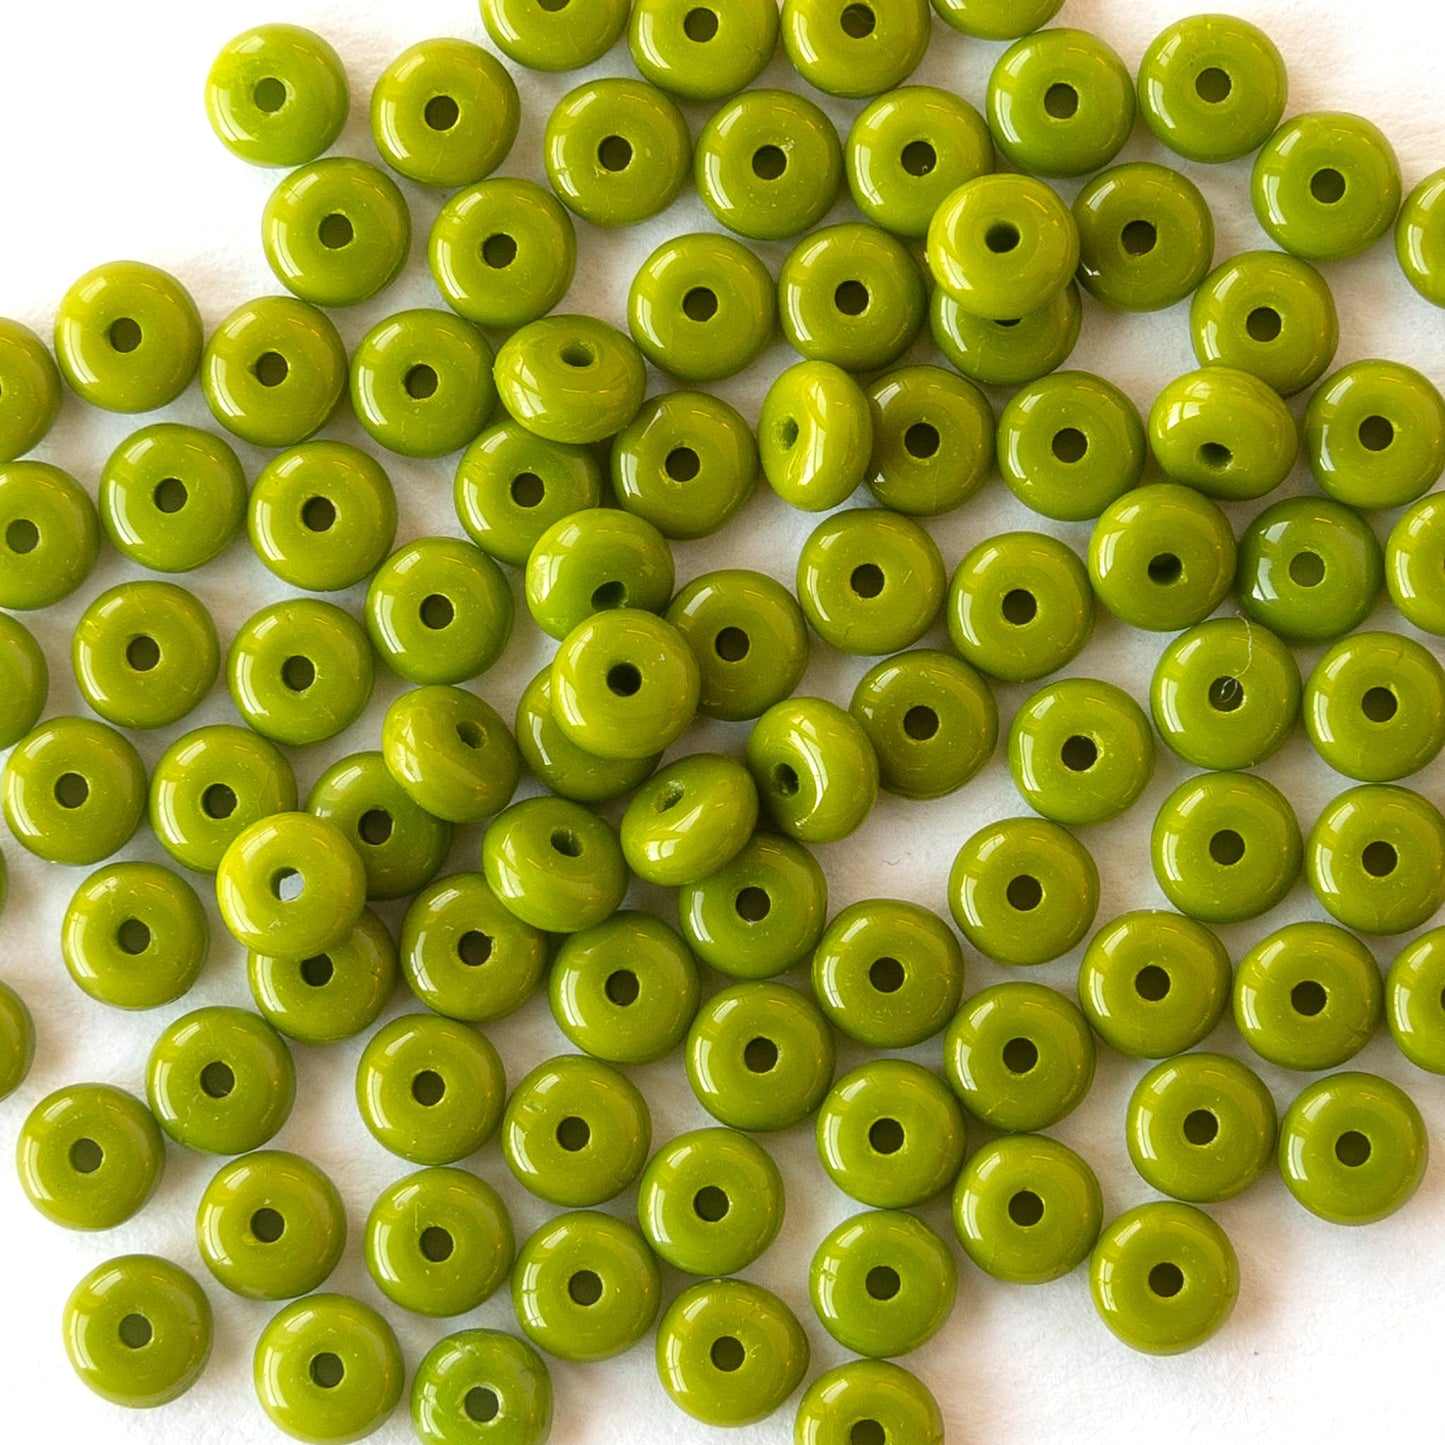 4mm Rondelle Beads - Opaque Lime- 100 Beads